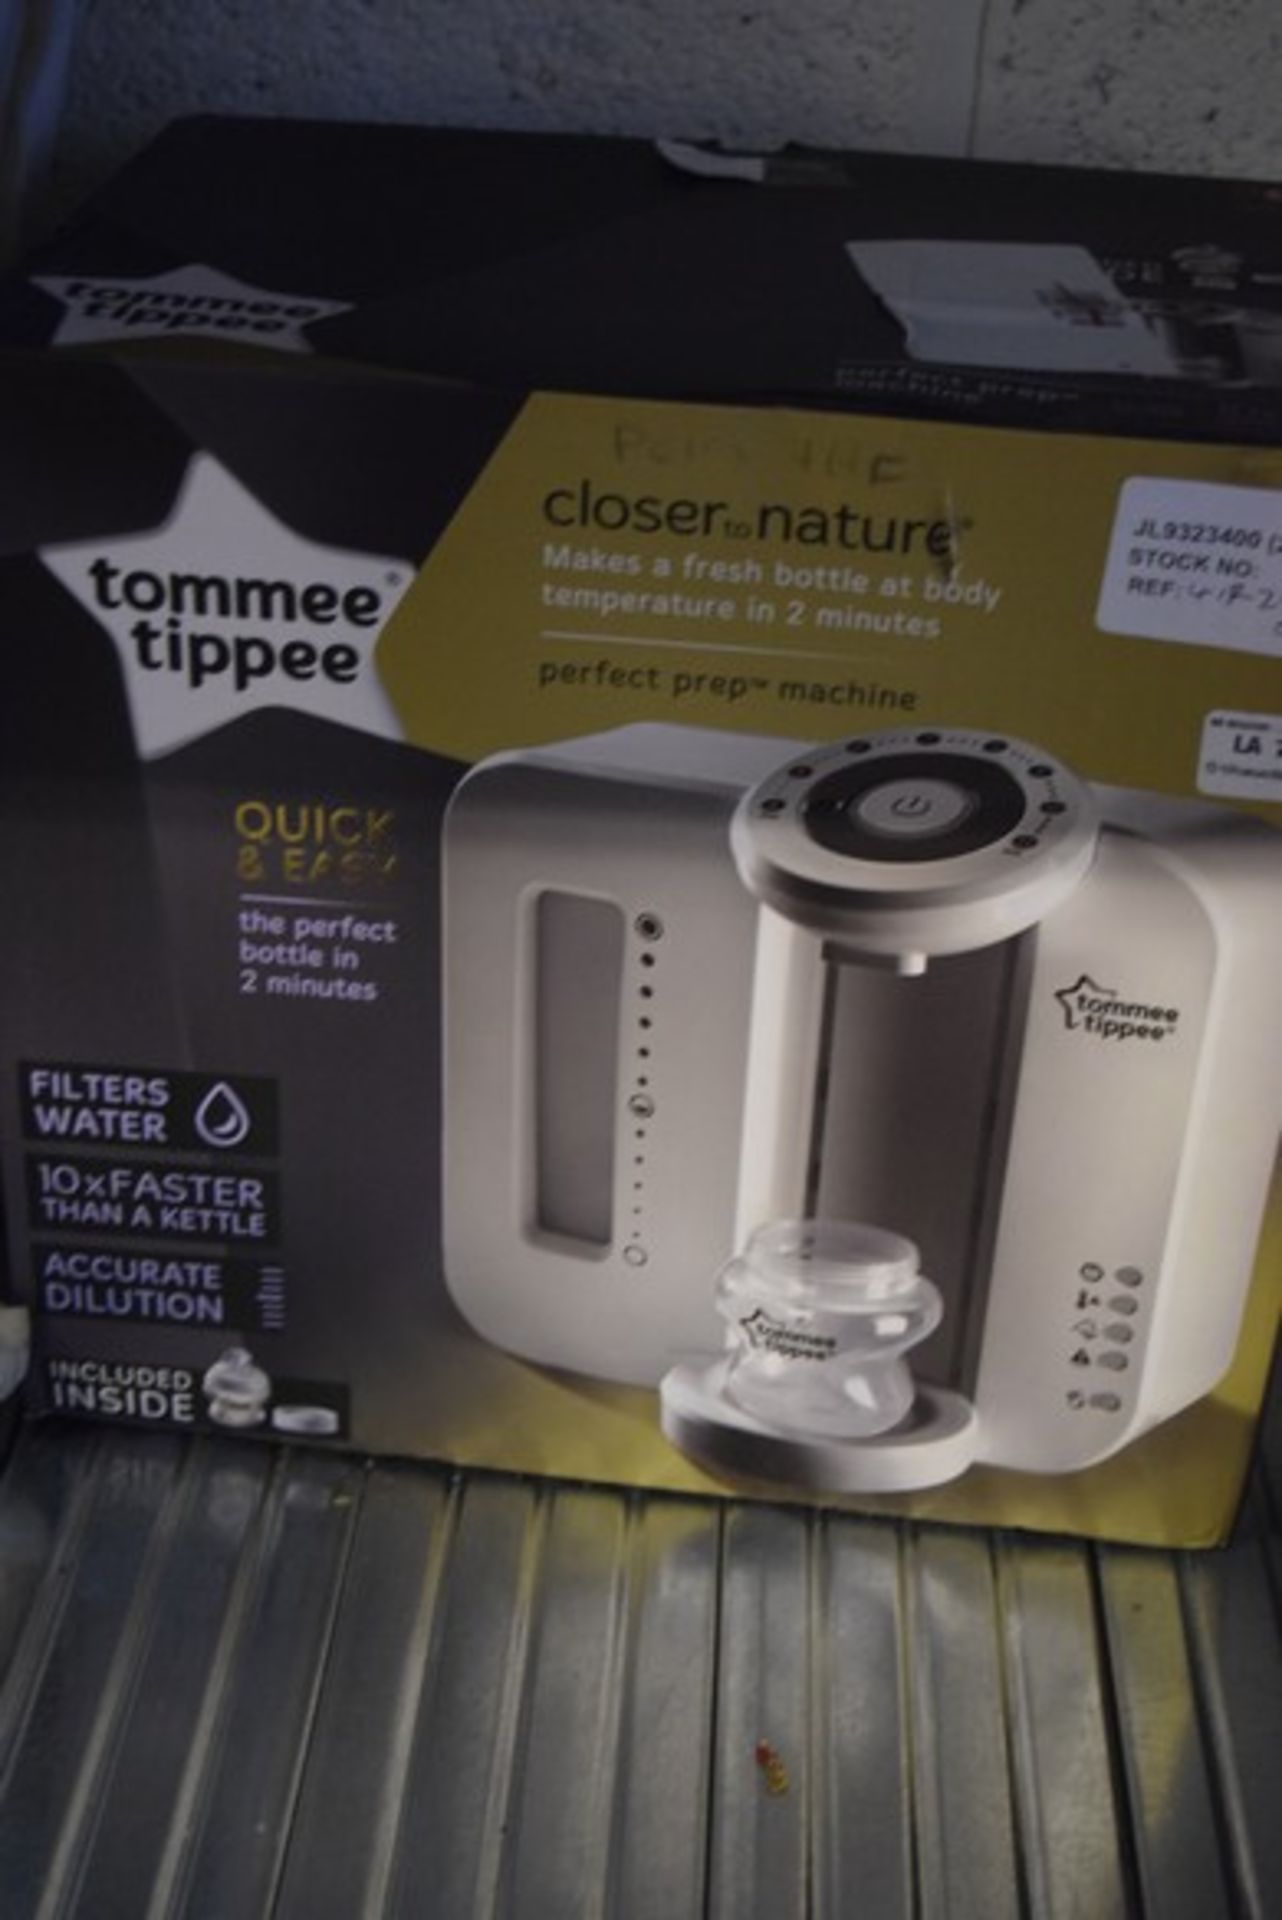 1 X BOXED TOMMEE TIPPEE CLOSER TO NATURE PERFECT PREP MACHINE RRP £60 20.11.17 4122913 T709